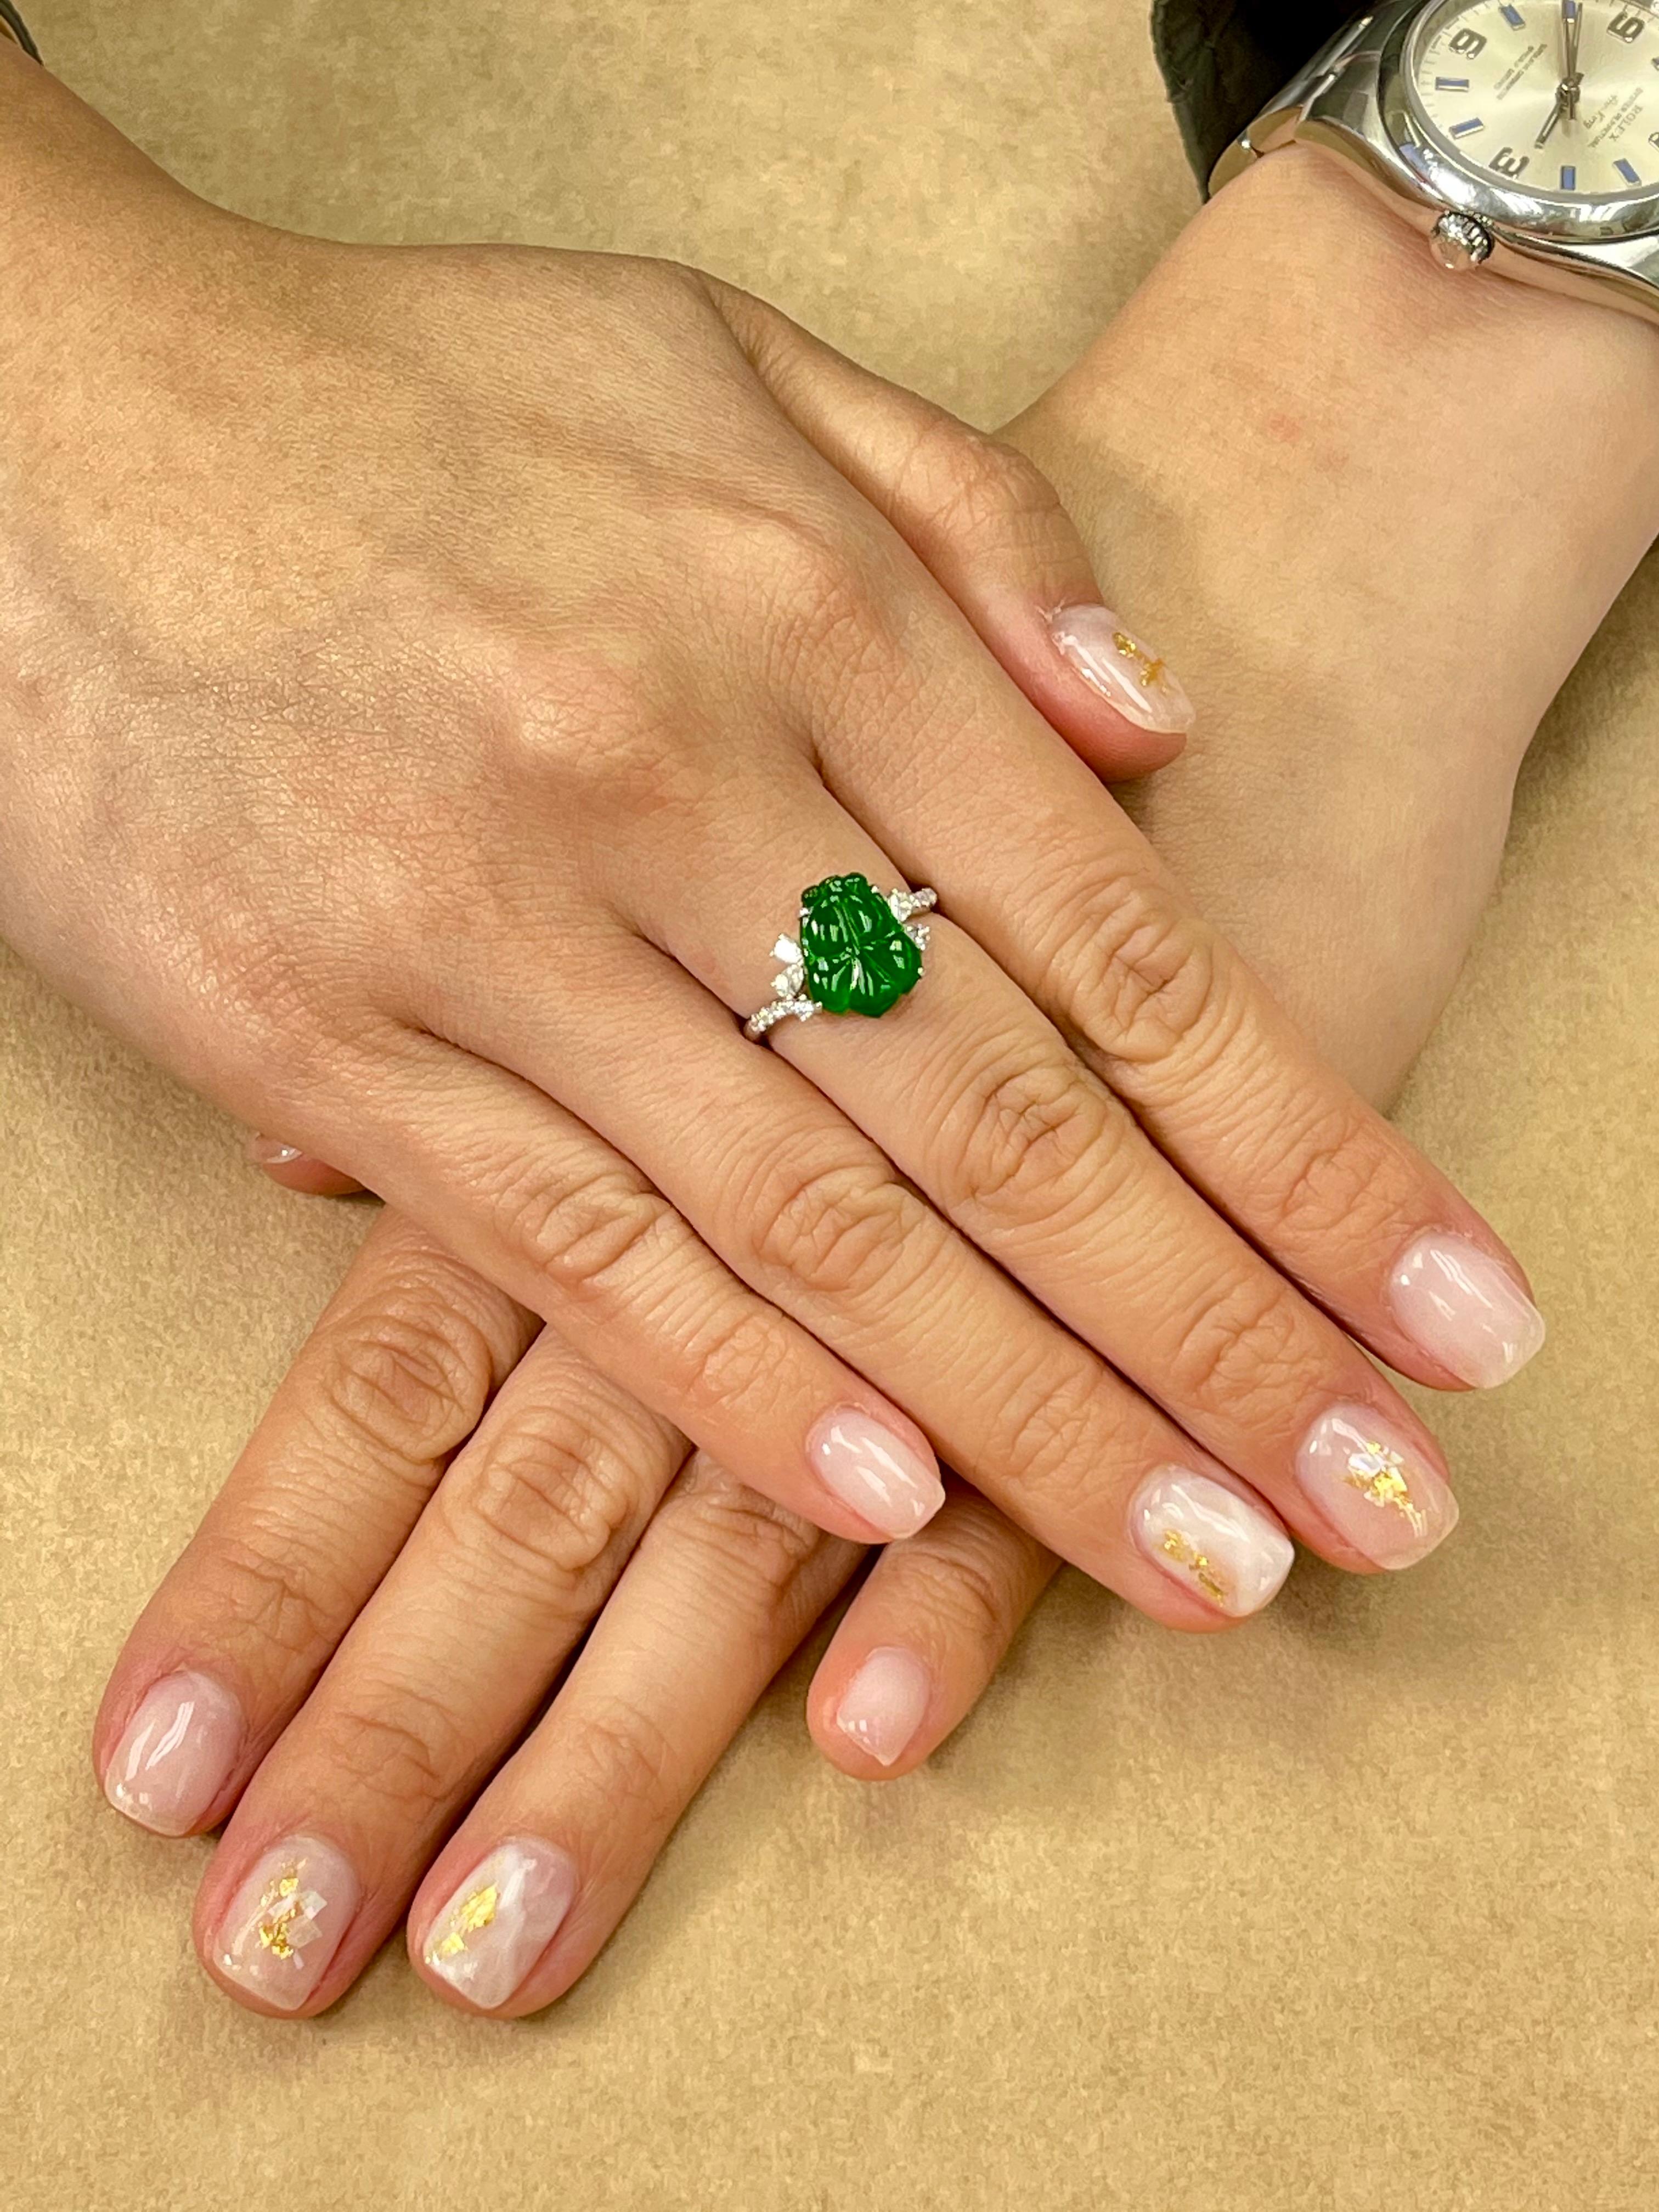 This ring has the best imperial green color, it GLOWS! Here is an imperial green Jade and diamond ring. It is certified by 2 labs natural jadeite jade. The ring is set in 18k white gold and diamonds. There are white diamonds totaling 0.275cts. The